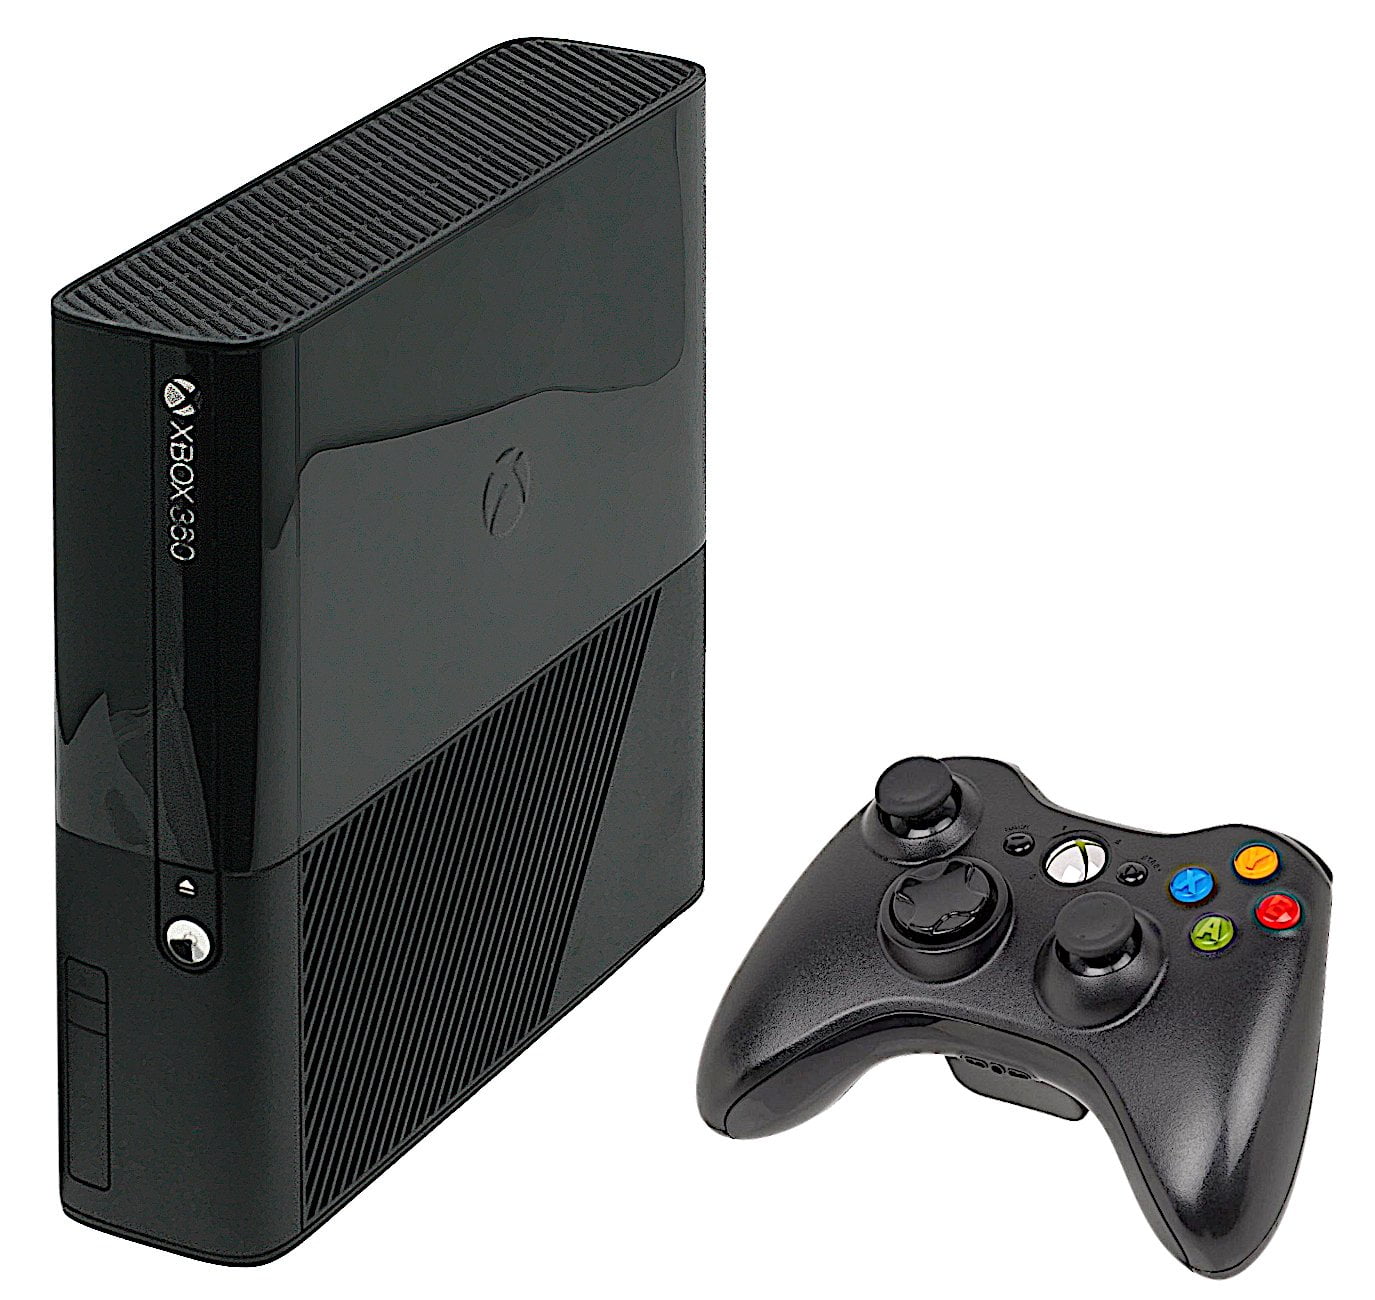 New and used Microsoft Xbox 360 Elite Gaming Consoles for sale, Facebook  Marketplace